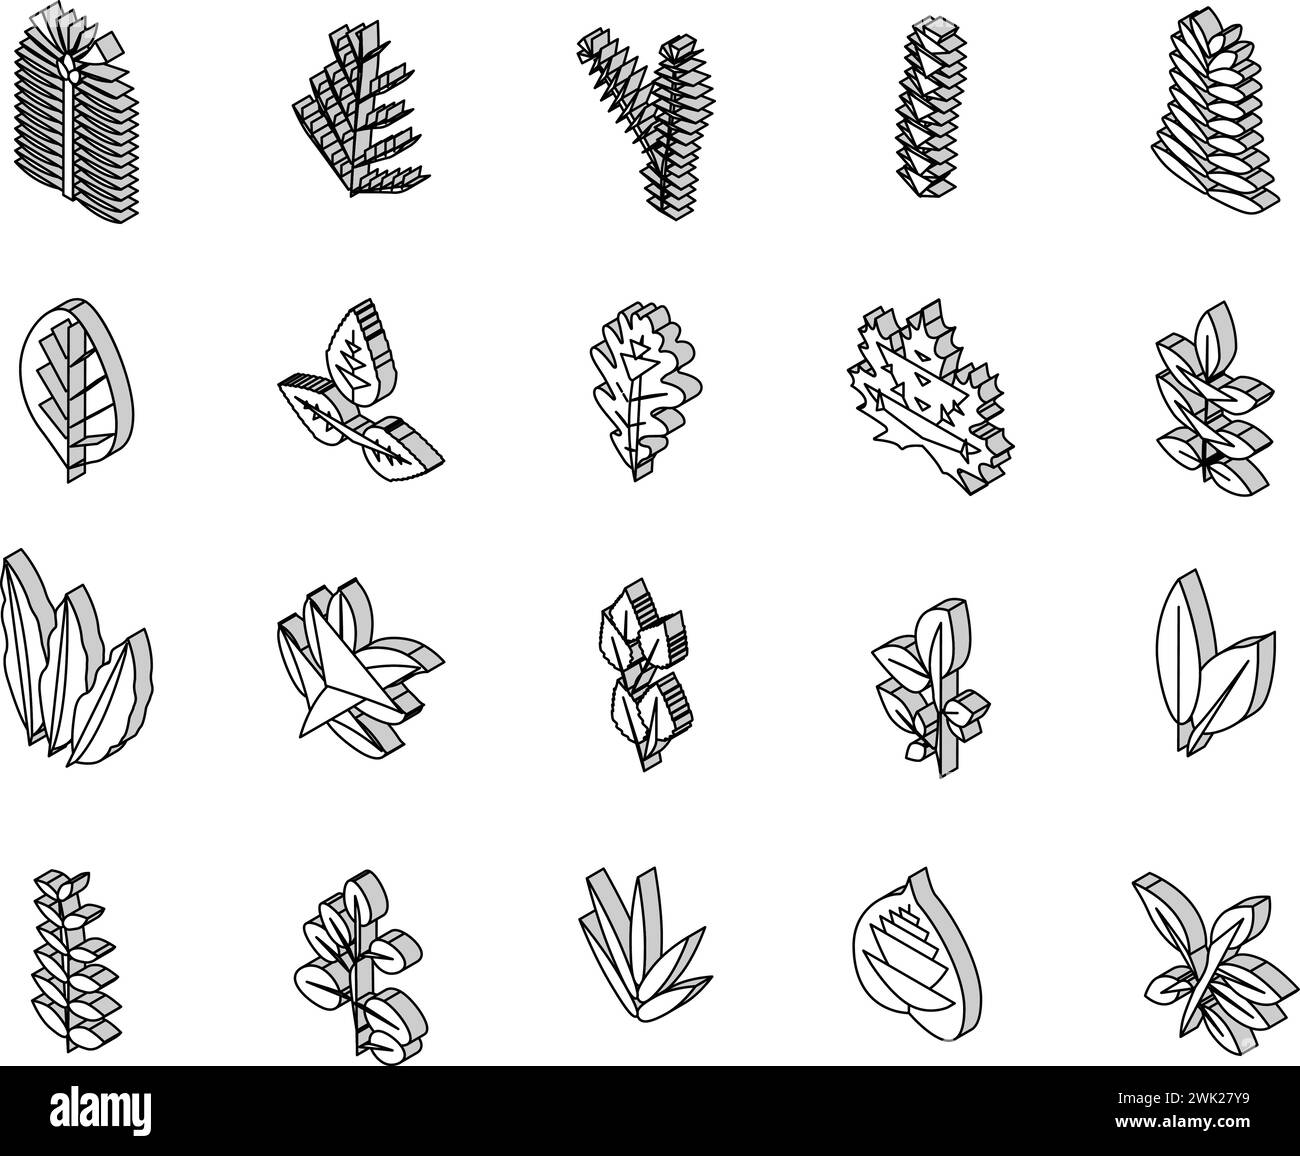 Leaf Of Tree, Bush Or Flower isometric icons set vector Stock Vector